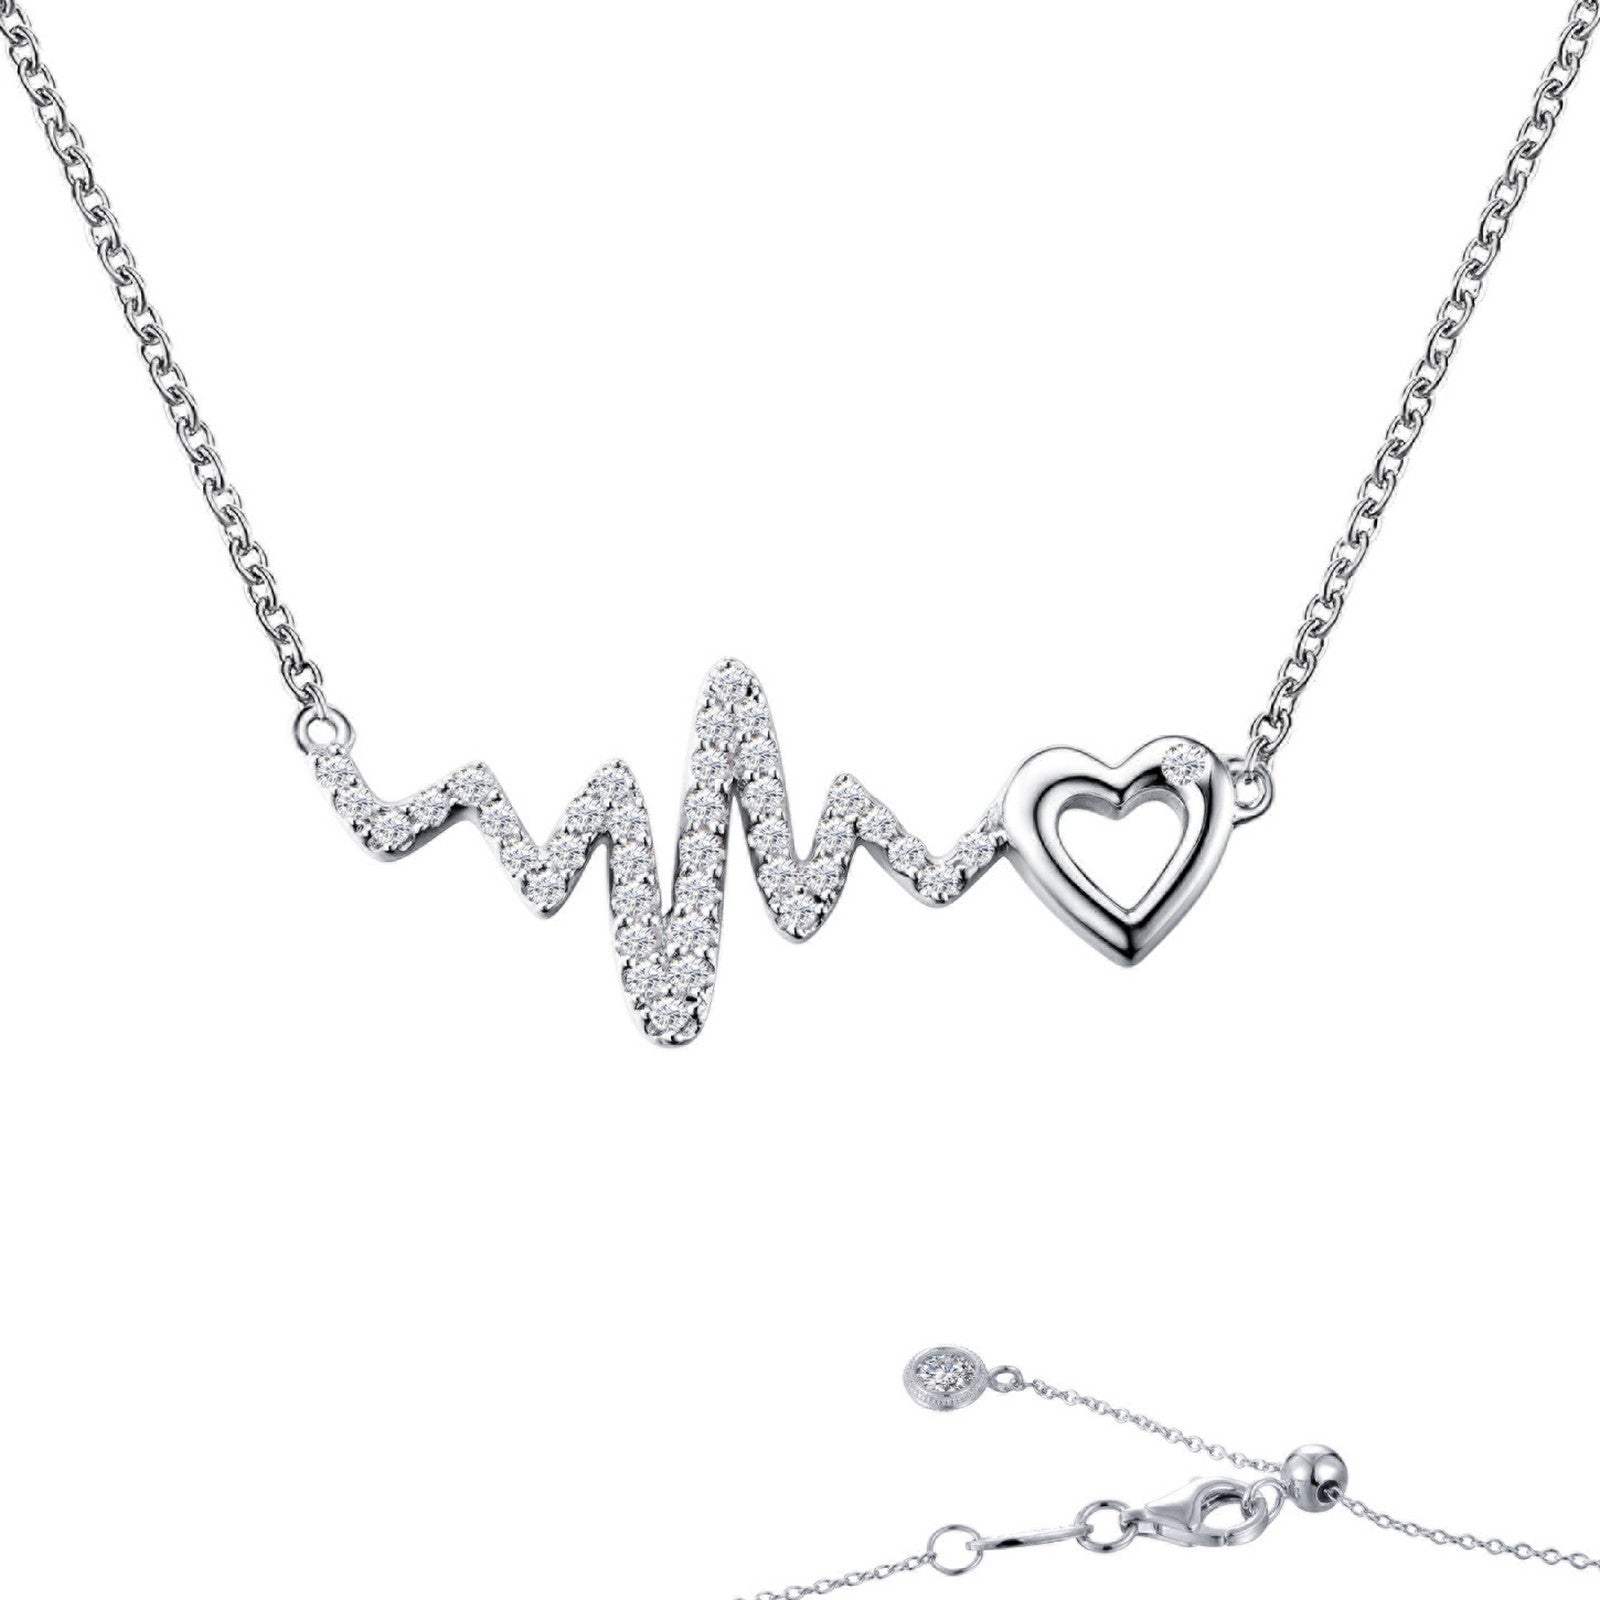 PLAYFUL AND LOVELY. THIS ADJUSTABLE NECKLACE, WITH A DAINTY HEART ALONG A HEARTBEAT DESIGN, IS SET WITH LAFONN'S SIGNATURE LASSAIRE STONES IN STERLING SILVER BONDED WITH PLATINUM.